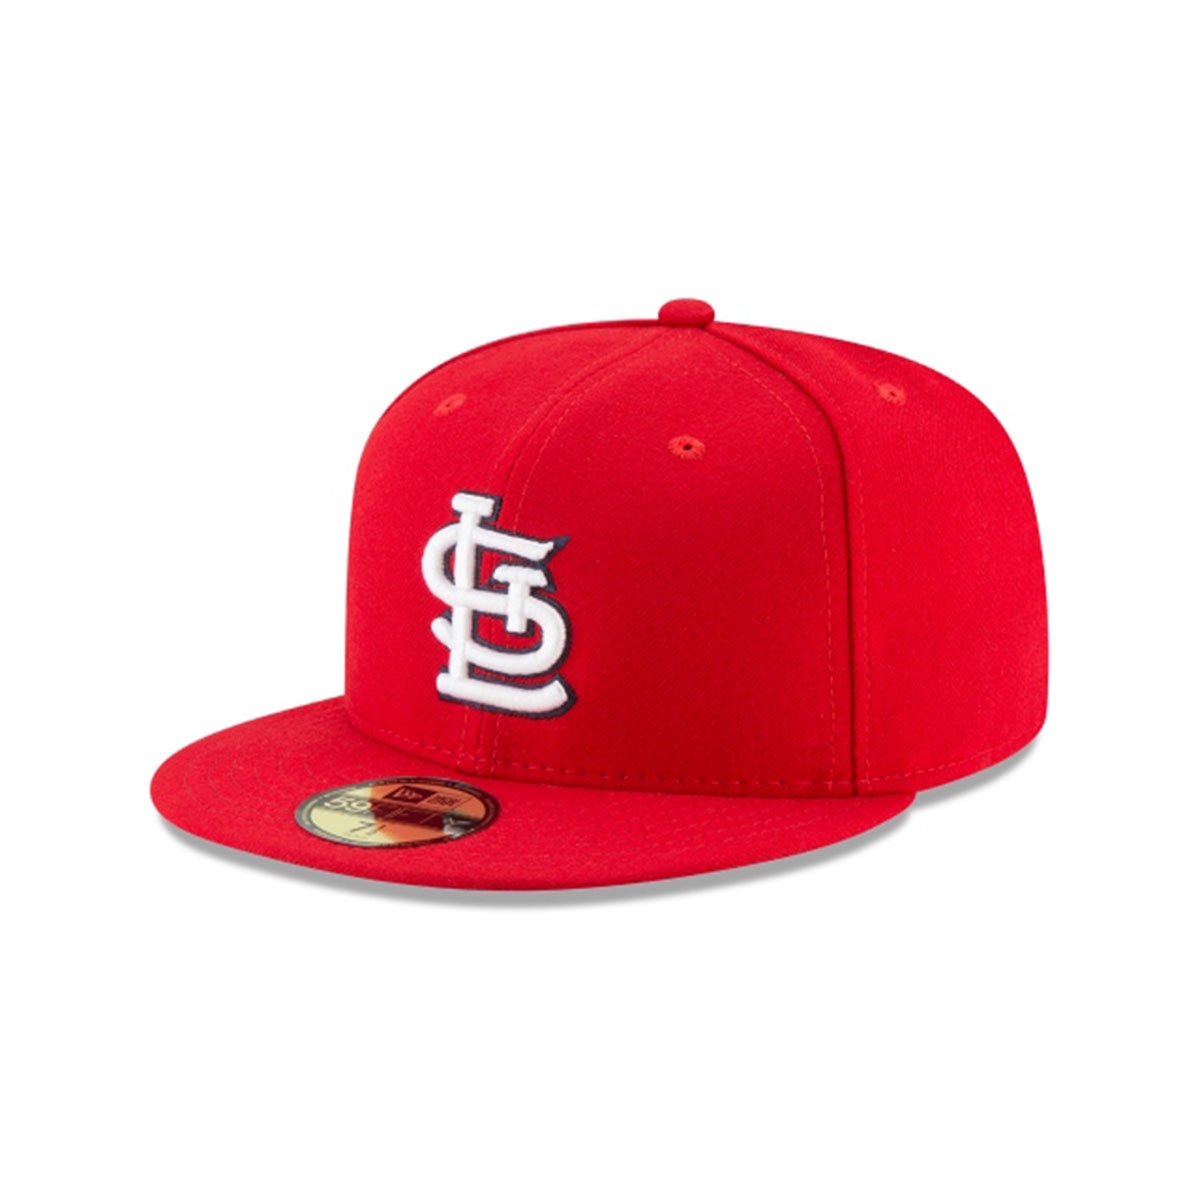 ST LOUIS CARDINALS 59FIFTY FITTED RED/WHTIE